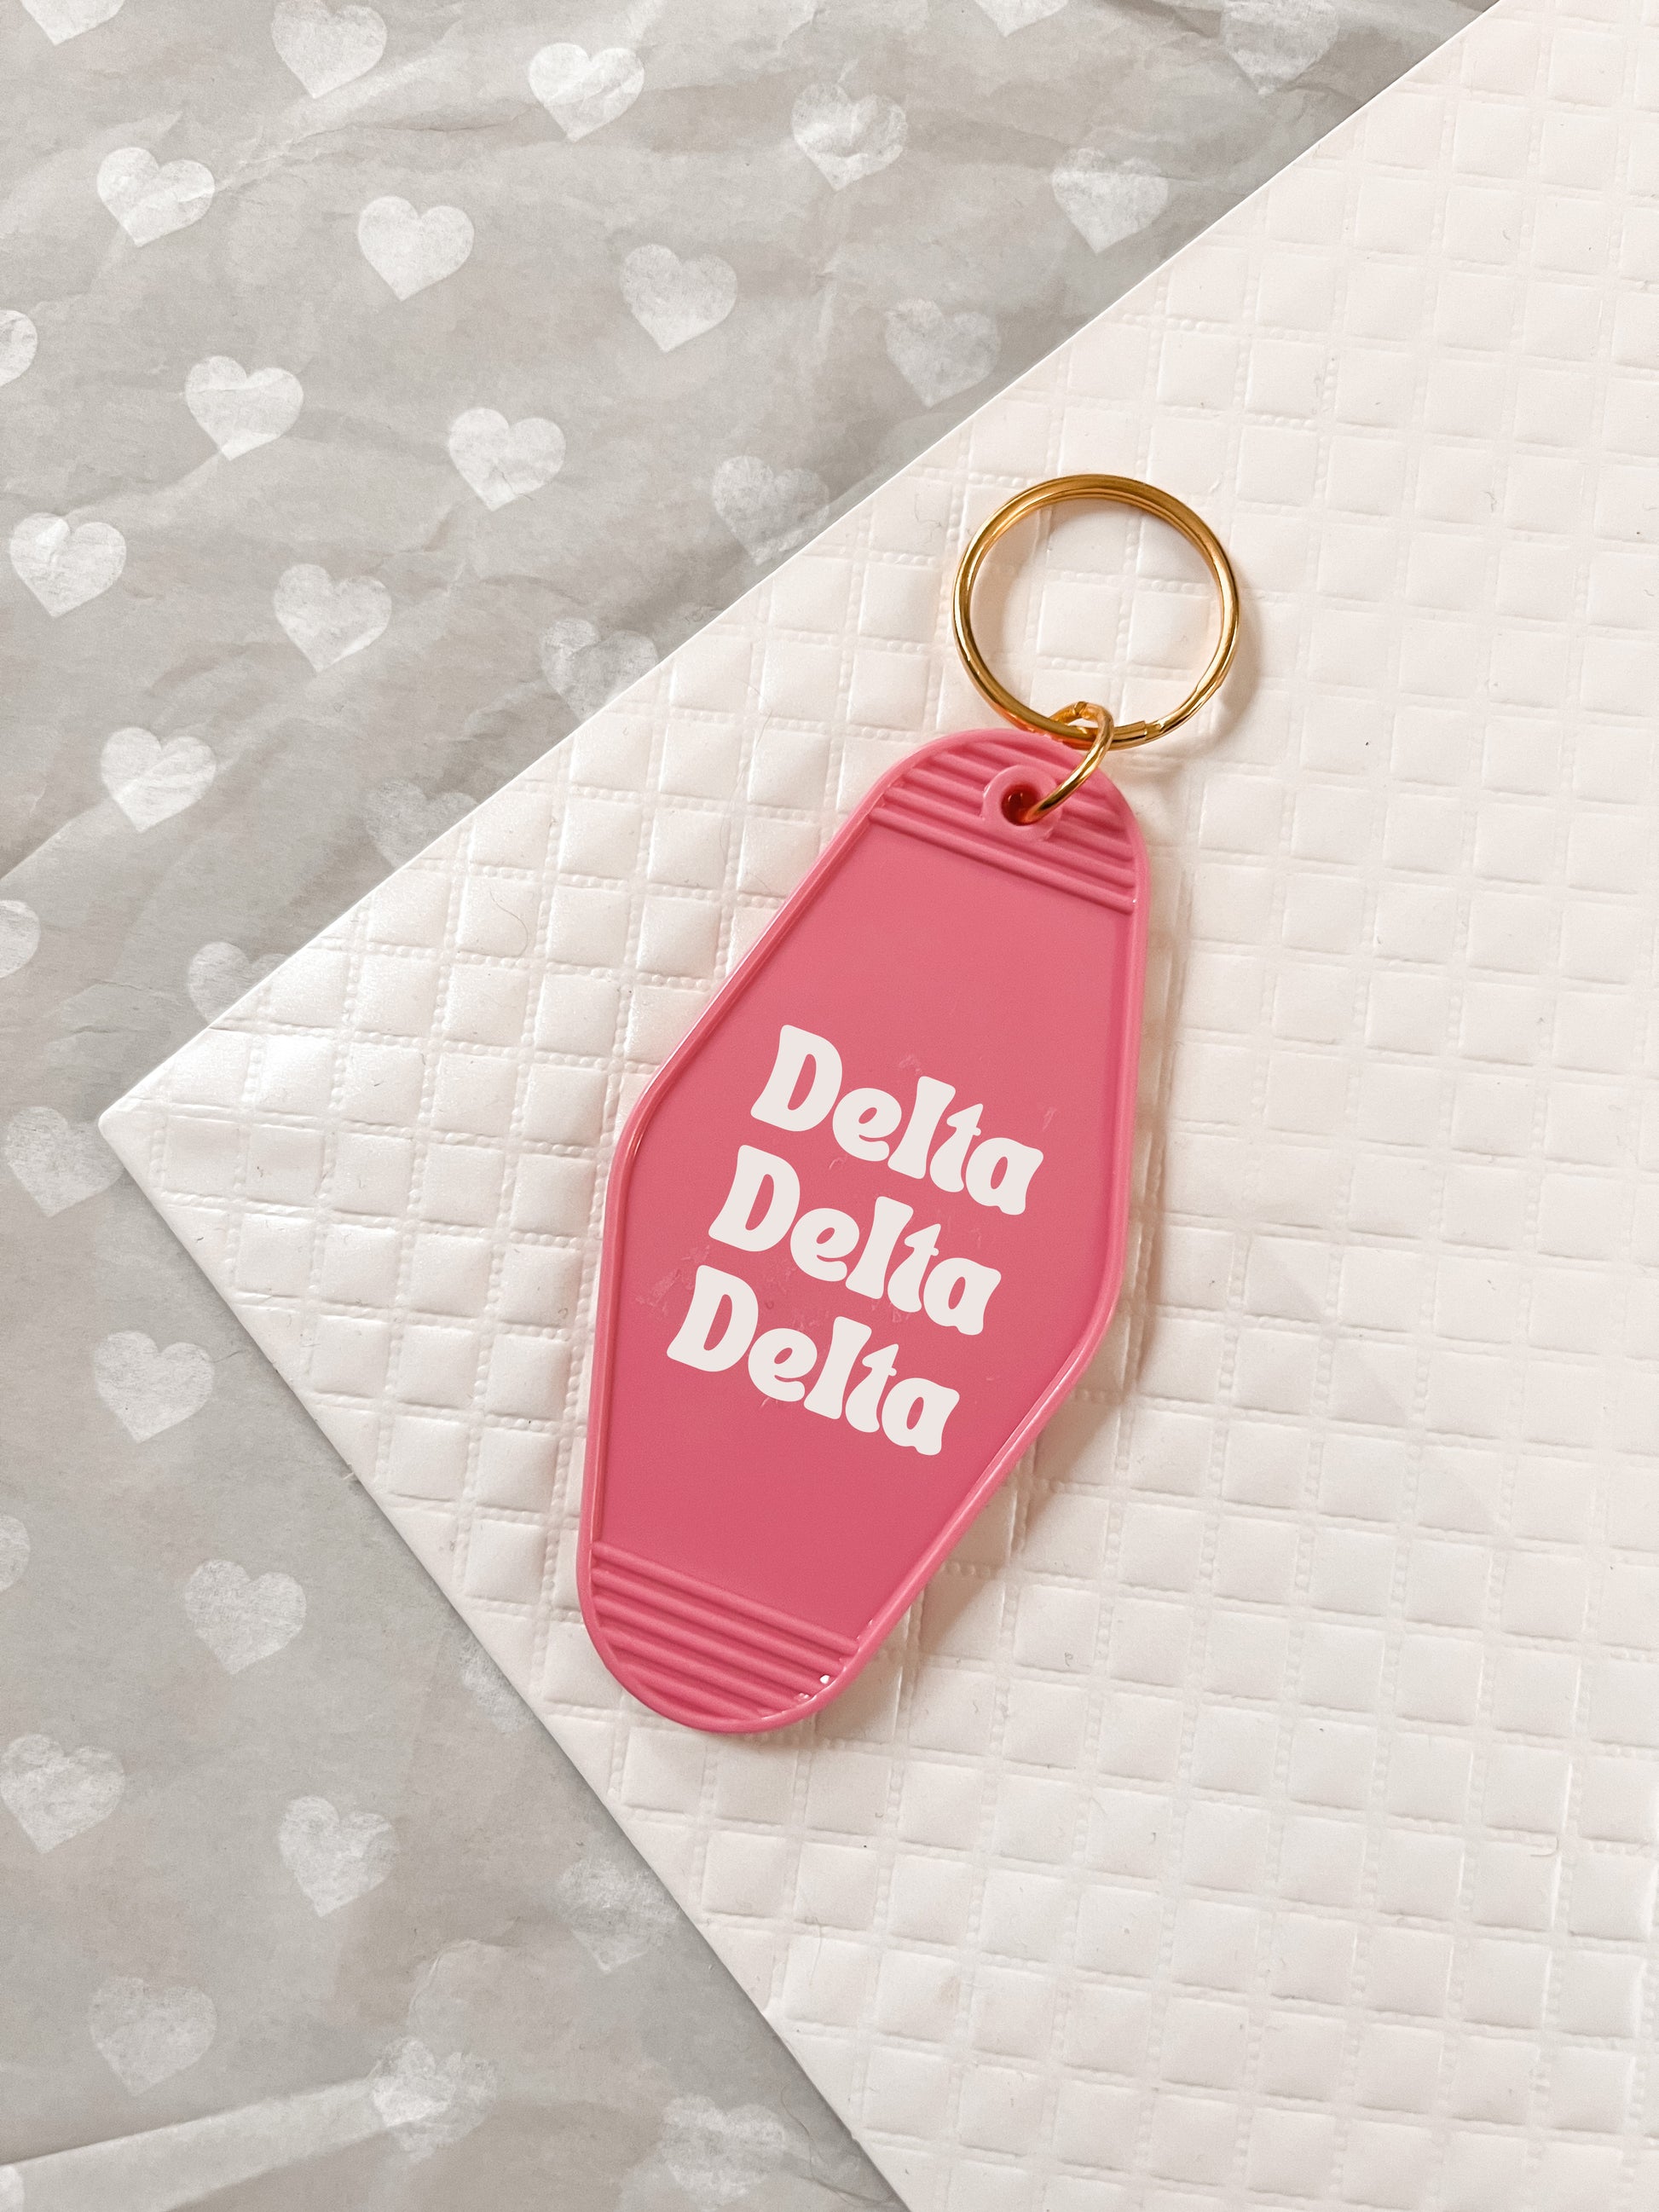 Delta Delta Delta Motel Hotel Key Chain in Hot pink with white letters and gold ring. TriDelta